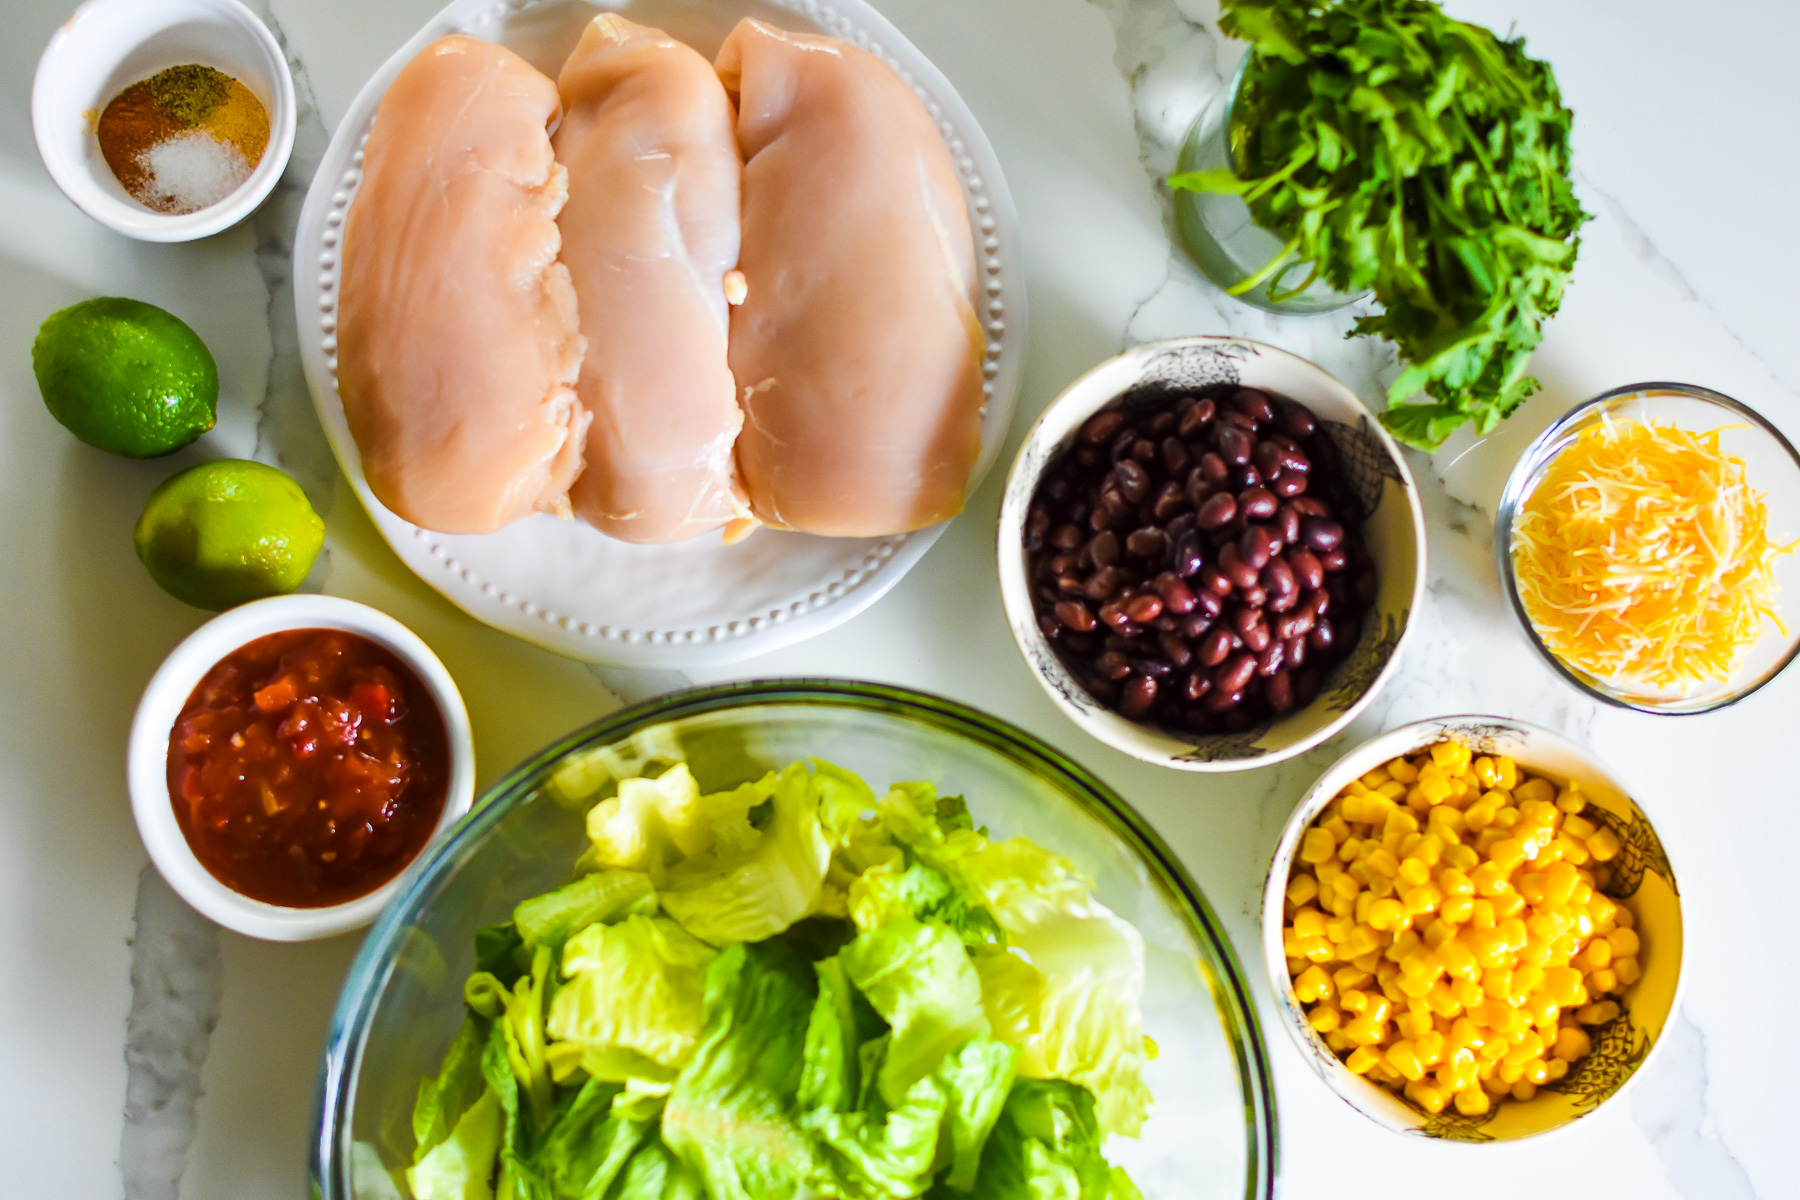 ingredients to make the best chopped southwestern chicken salad on granite counter top: spices, boneless skinless chicken breast, limes, salsa, chopped romaine, black beans, corn, cilantro, and monterrey jack cheese.